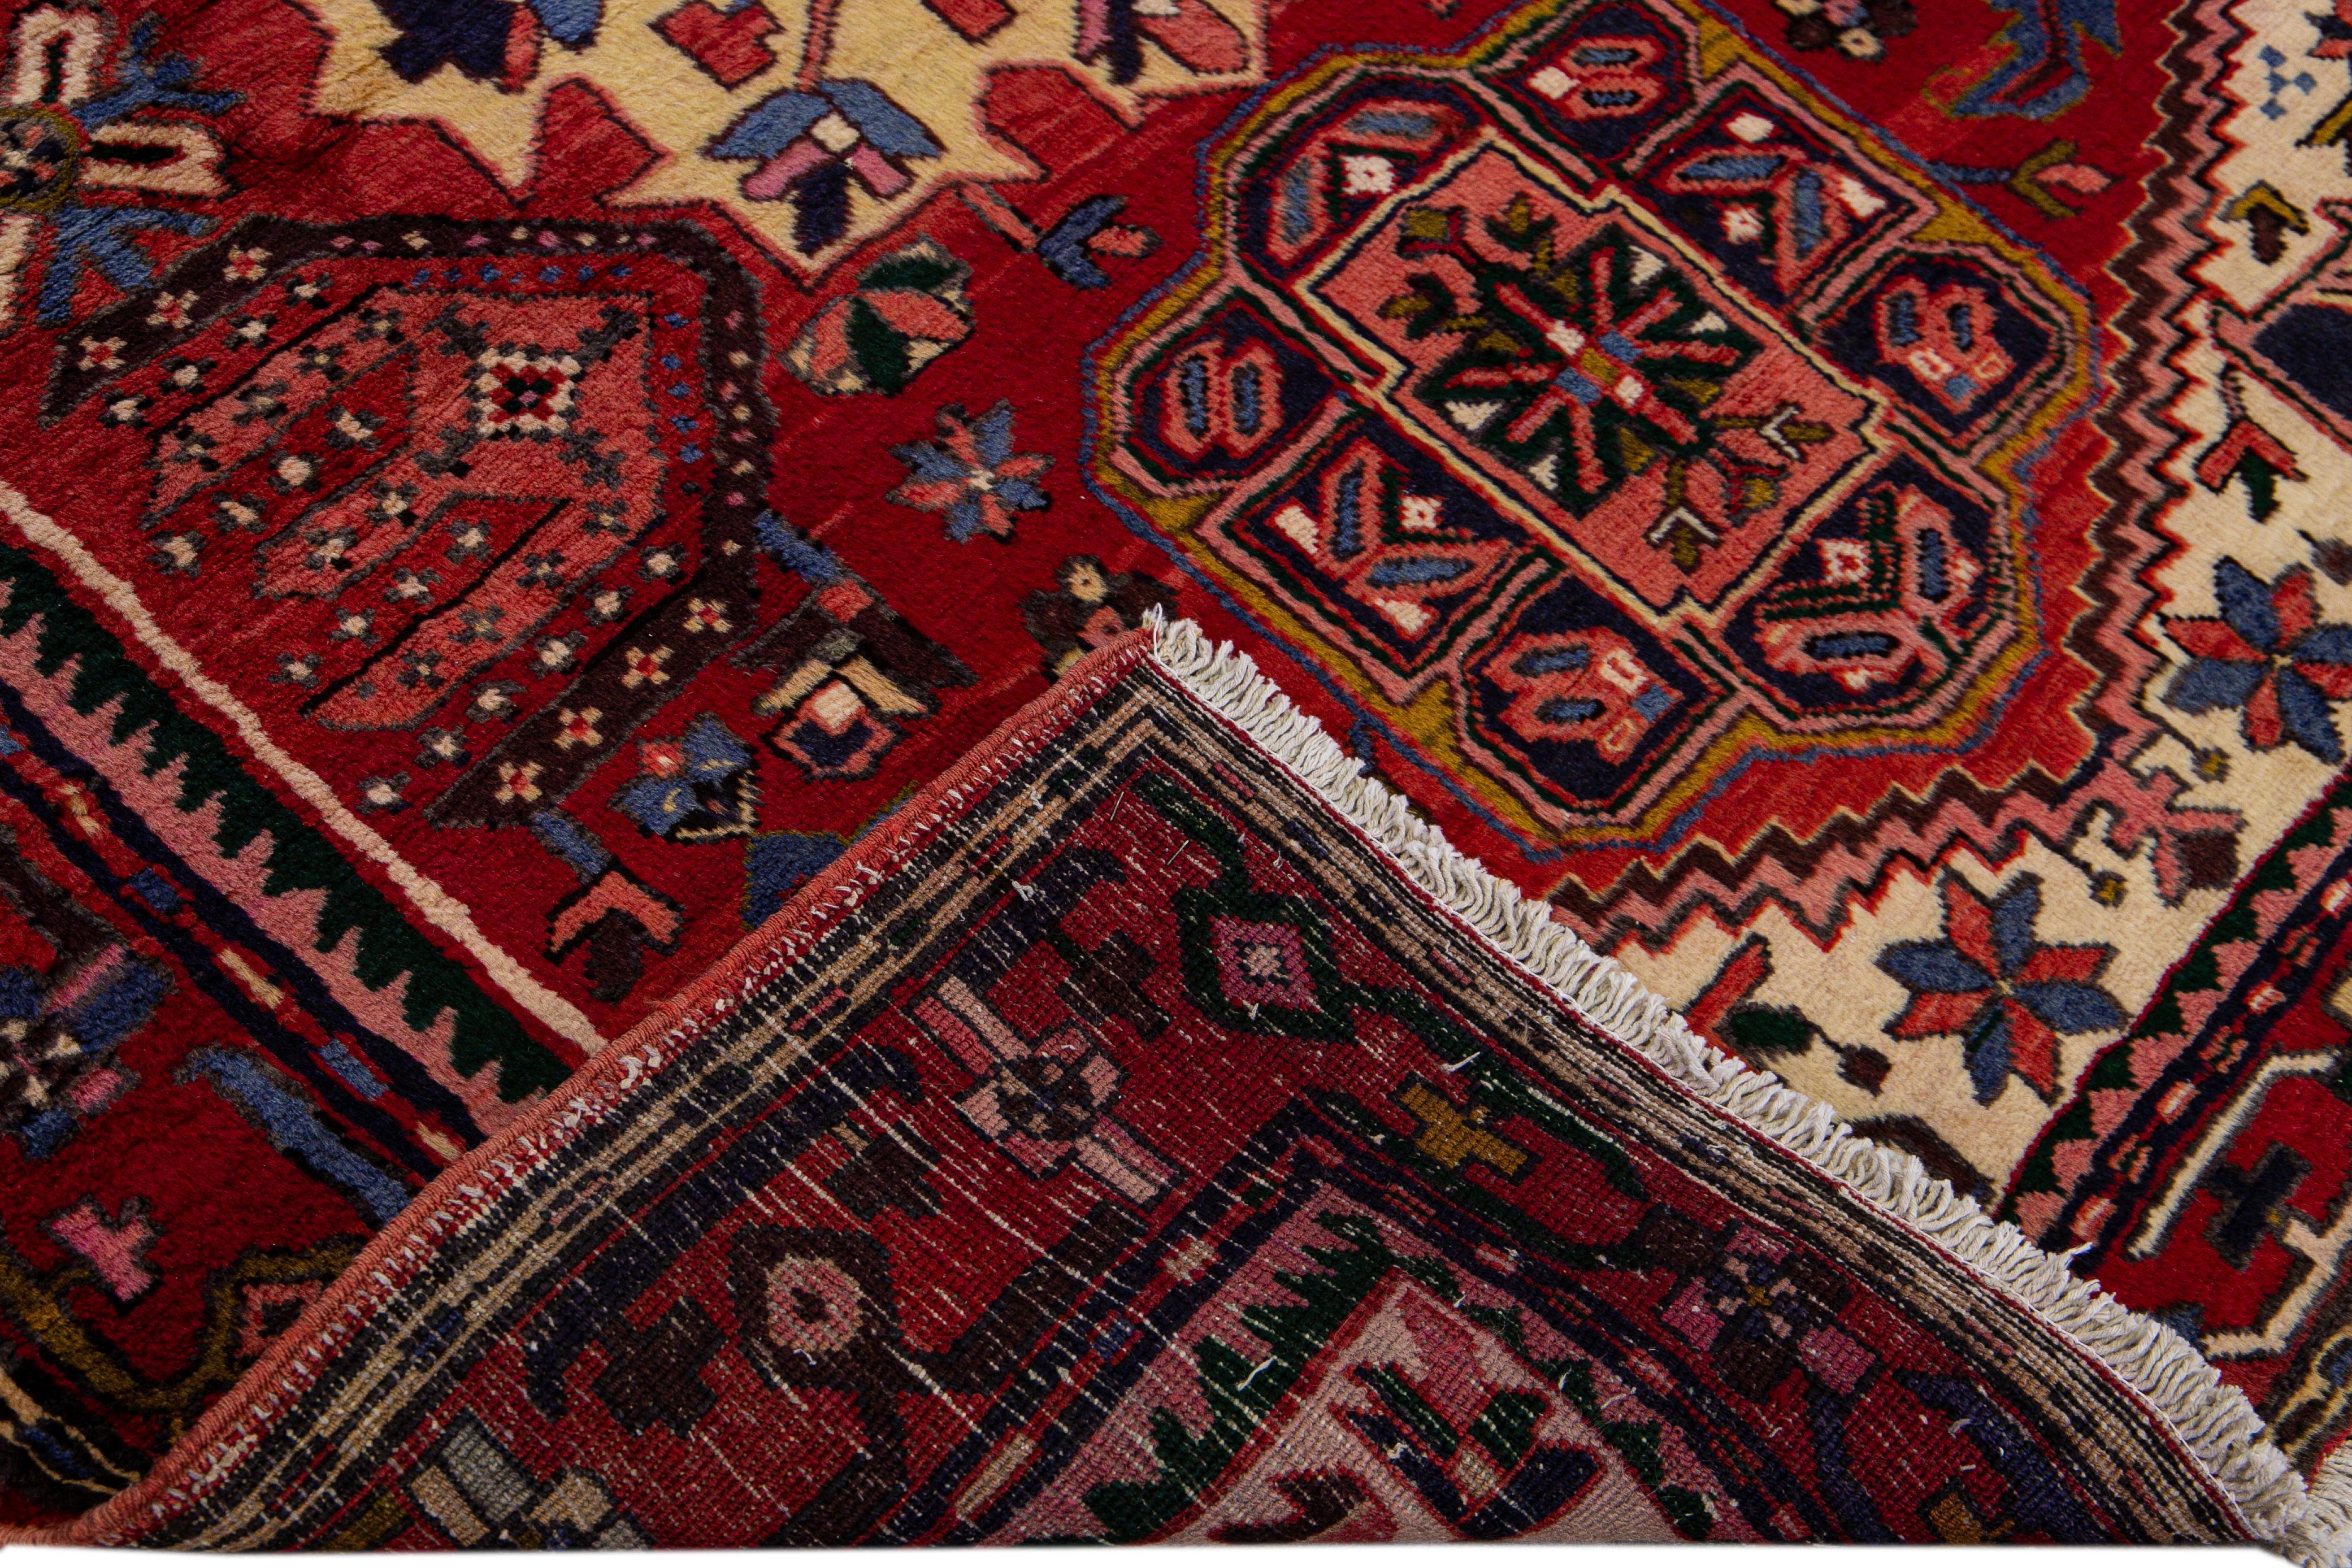 Beautiful antique Heriz hand-knotted wool rug with a red field. This Persian rug has a designed frame and multicolor accents in a gorgeous all-over geometric medallion floral motif.

This rug measures: 4'11